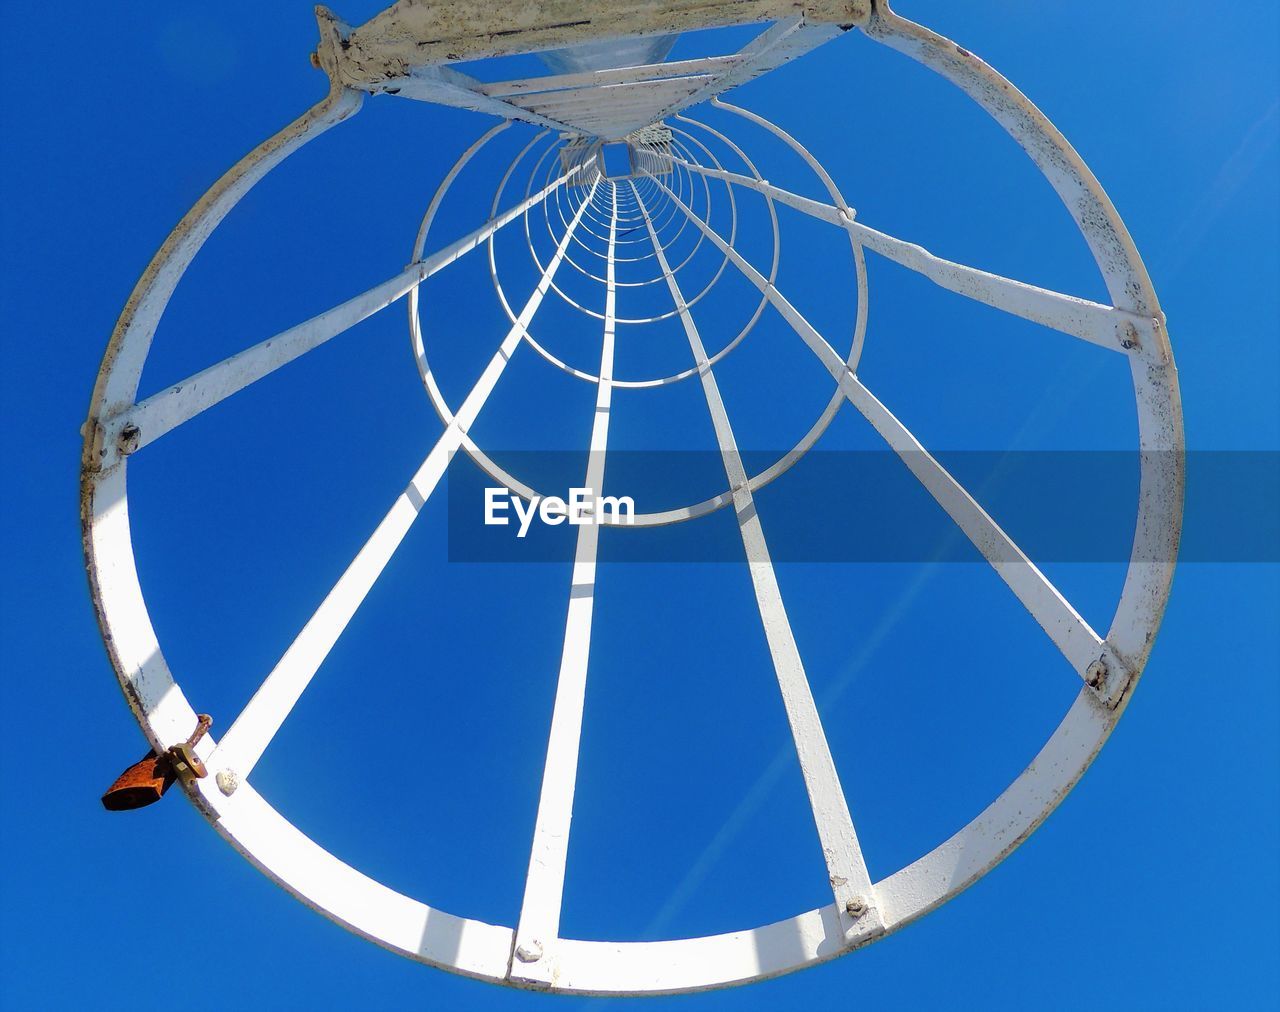 LOW ANGLE VIEW OF CHAIN SWING RIDE AGAINST BLUE SKY